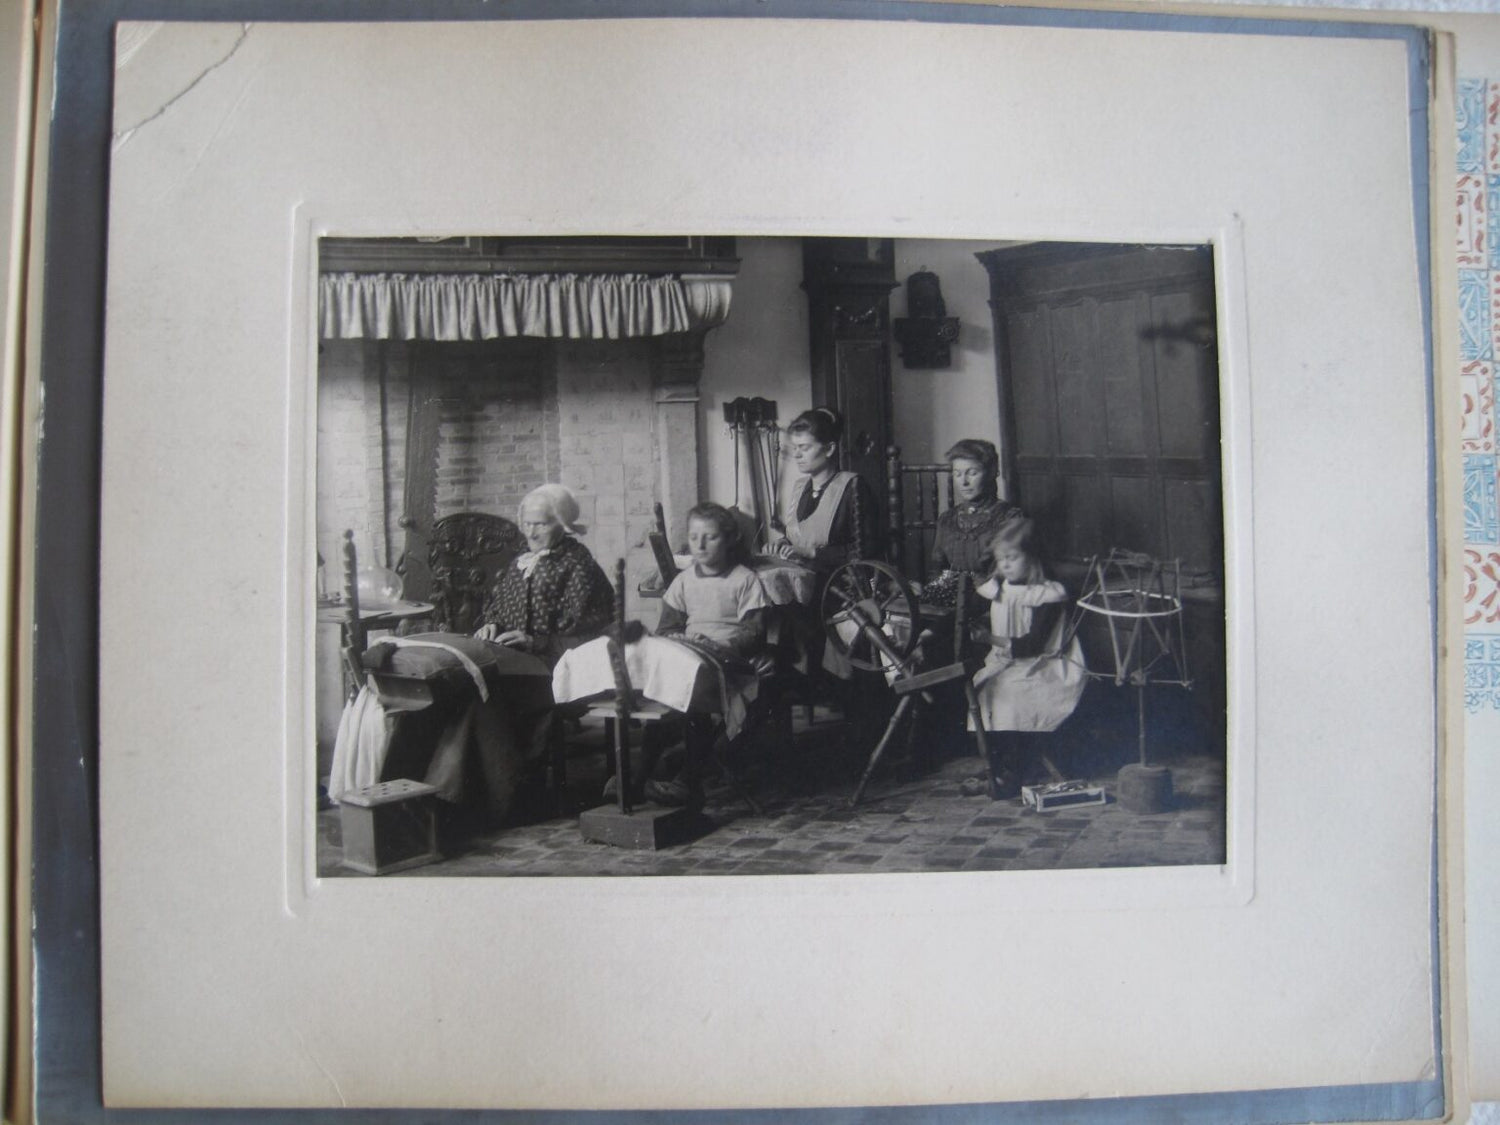 In an album compiled by Baroness Josse Allard, née Marie-Antoinette Calley Saint-Paul de Sinçay (1881-1977) between 1915 and 1919, a photograph depicts three generations of Belgian lacemakers working together at the beginning of the twentieth century, yet it might also be a staged montage. Belgium, Brussels, Art & History Museum. Photo: author.